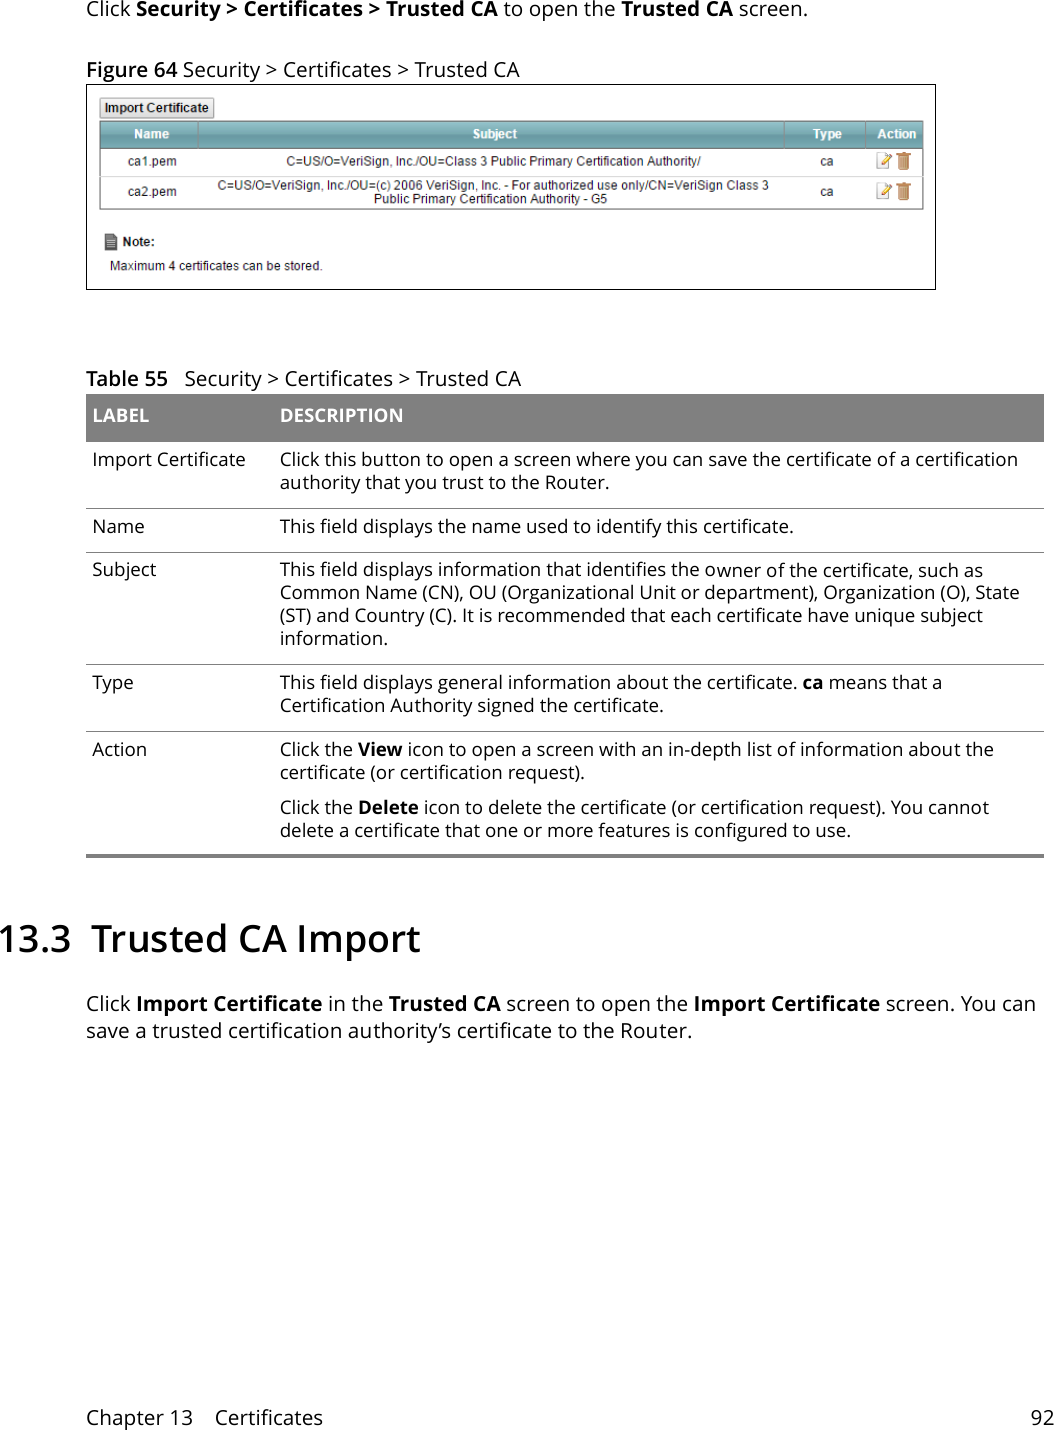 Chapter 13    Certificates 92Click Security &gt; Certificates &gt; Trusted CA to open the Trusted CA screen. Figure 64 Security &gt; Certificates &gt; Trusted CA Table 55   Security &gt; Certificates &gt; Trusted CA LABEL DESCRIPTIONImport Certificate Click this button to open a screen where you can save the certificate of a certification authority that you trust to the Router.Name This field displays the name used to identify this certificate. Subject This field displays information that identifies the owner of the certificate, such as Common Name (CN), OU (Organizational Unit or department), Organization (O), State (ST) and Country (C). It is recommended that each certificate have unique subject information.Type This field displays general information about the certificate. ca means that a Certification Authority signed the certificate. Action Click the View icon to open a screen with an in-depth list of information about the certificate (or certification request).Click the Delete icon to delete the certificate (or certification request). You cannot delete a certificate that one or more features is configured to use.13.3  Trusted CA Import   Click Import Certificate in the Trusted CA screen to open the Import Certificate screen. You can save a trusted certification authority’s certificate to the Router.